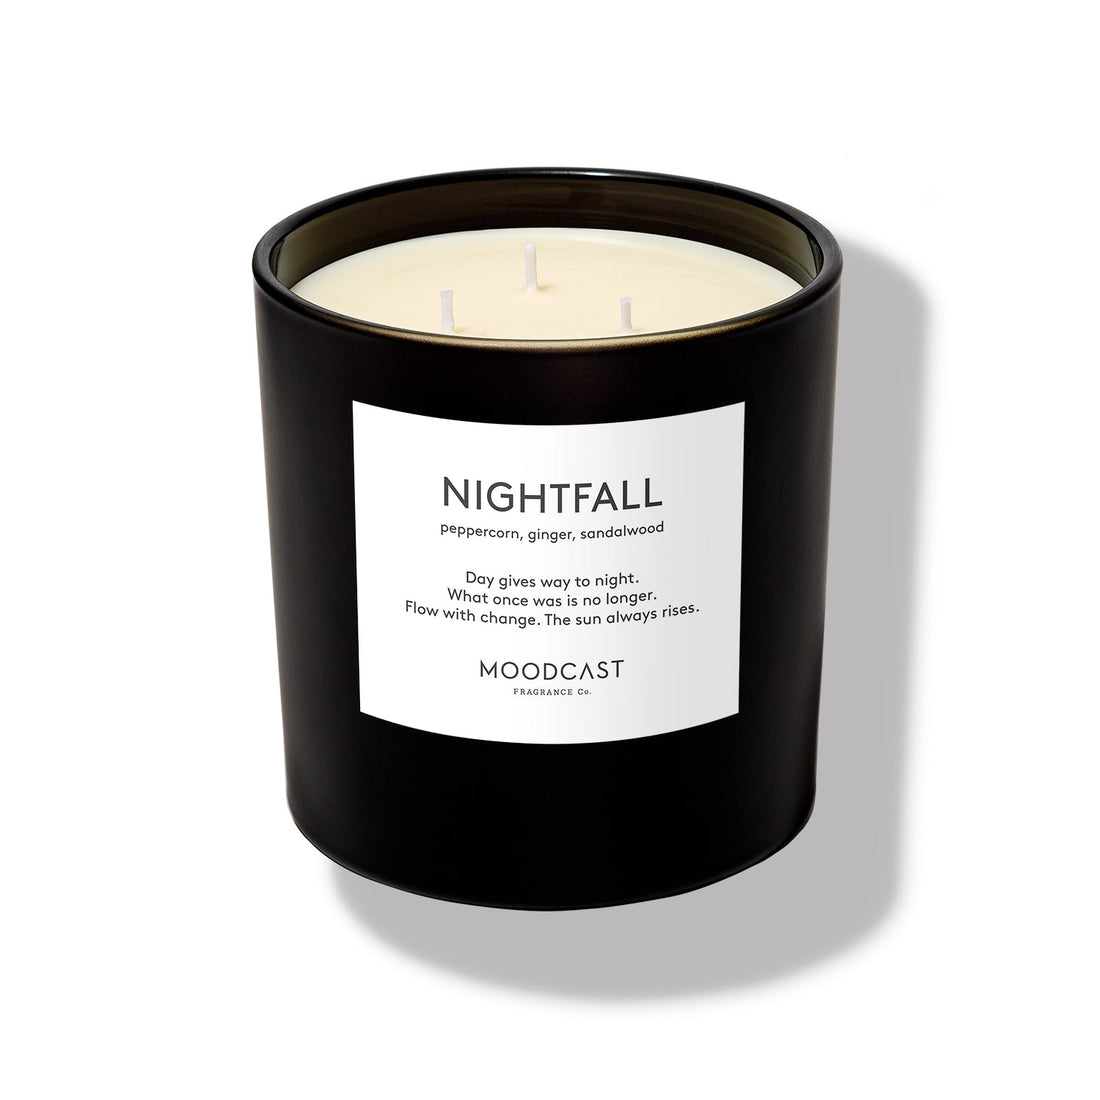 Nightfall - Night & Day Collection (Black & White) - 24oz/680g Coconut Wax Blend Glass Jar 3-Wick Candle - Key Notes: Peppercorn, Ginger, Sandalwood